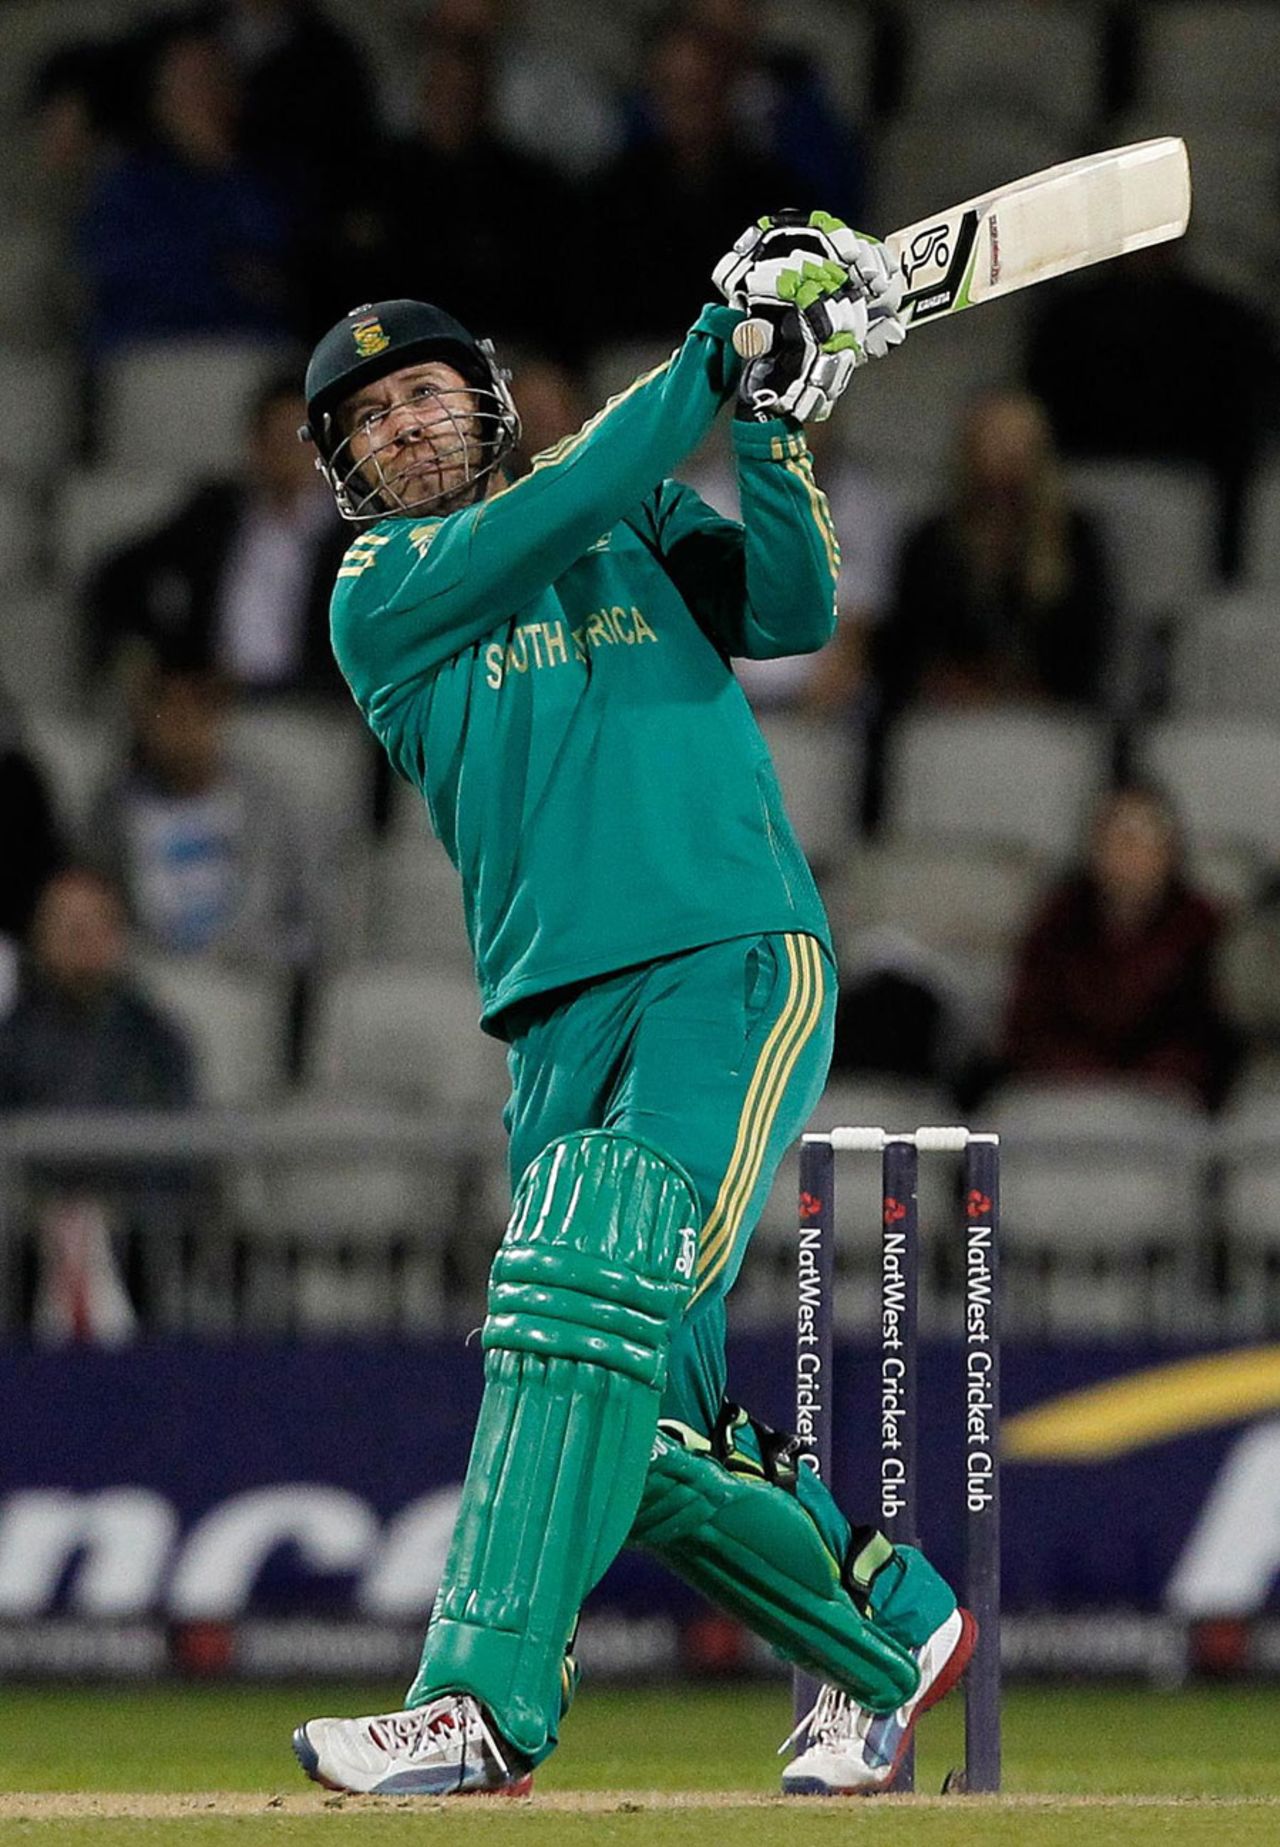 AB de Villiers made just 1, England v South Africa, 2nd T20, Old Trafford, September, 10, 2012